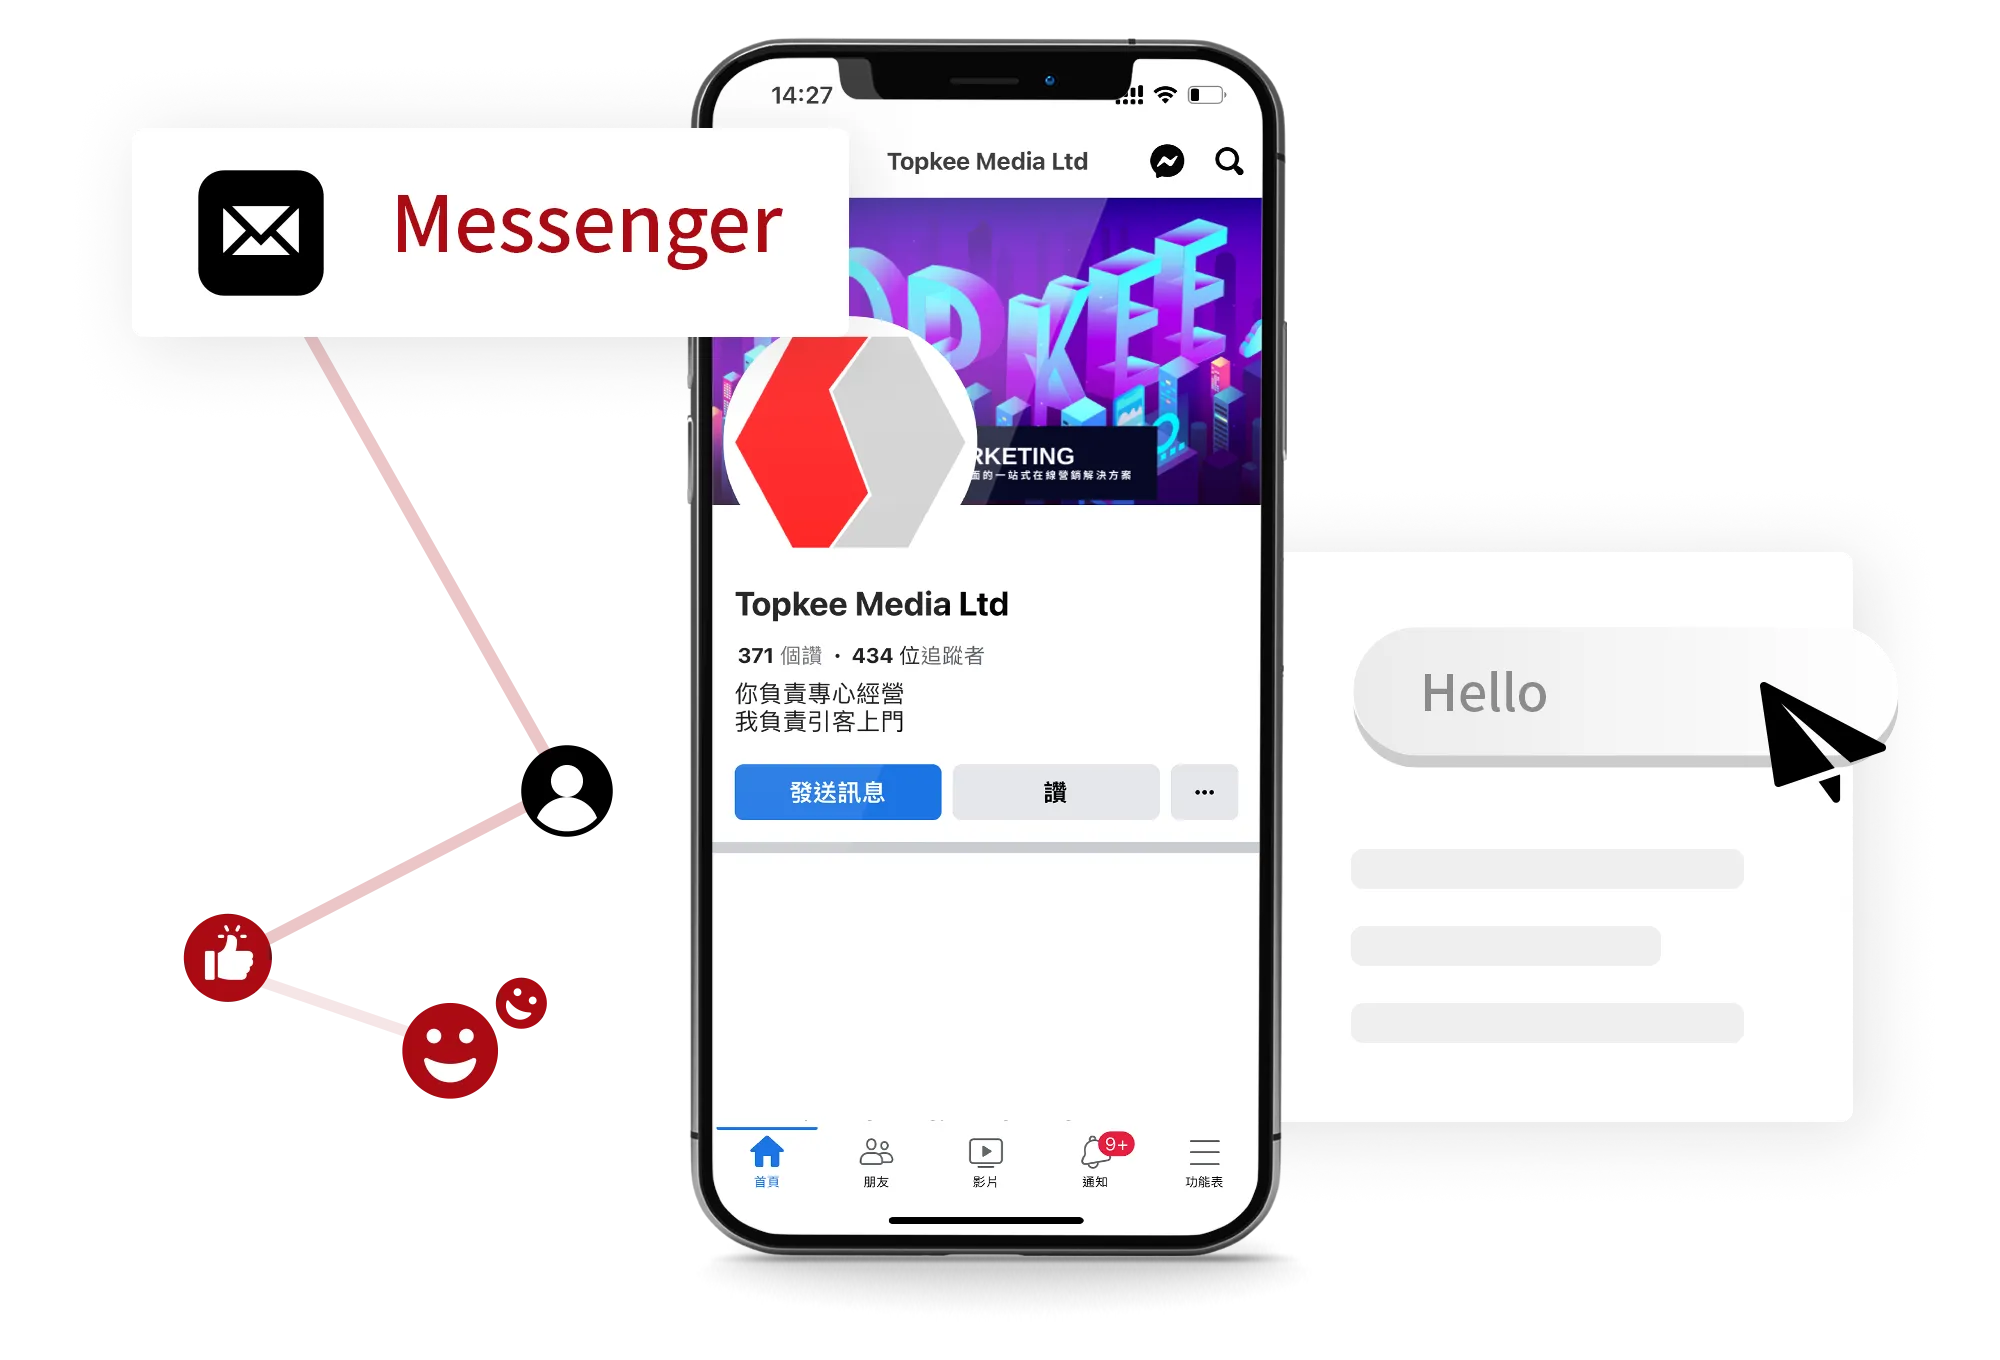 integrate Messenger conversations into your marketing strategy